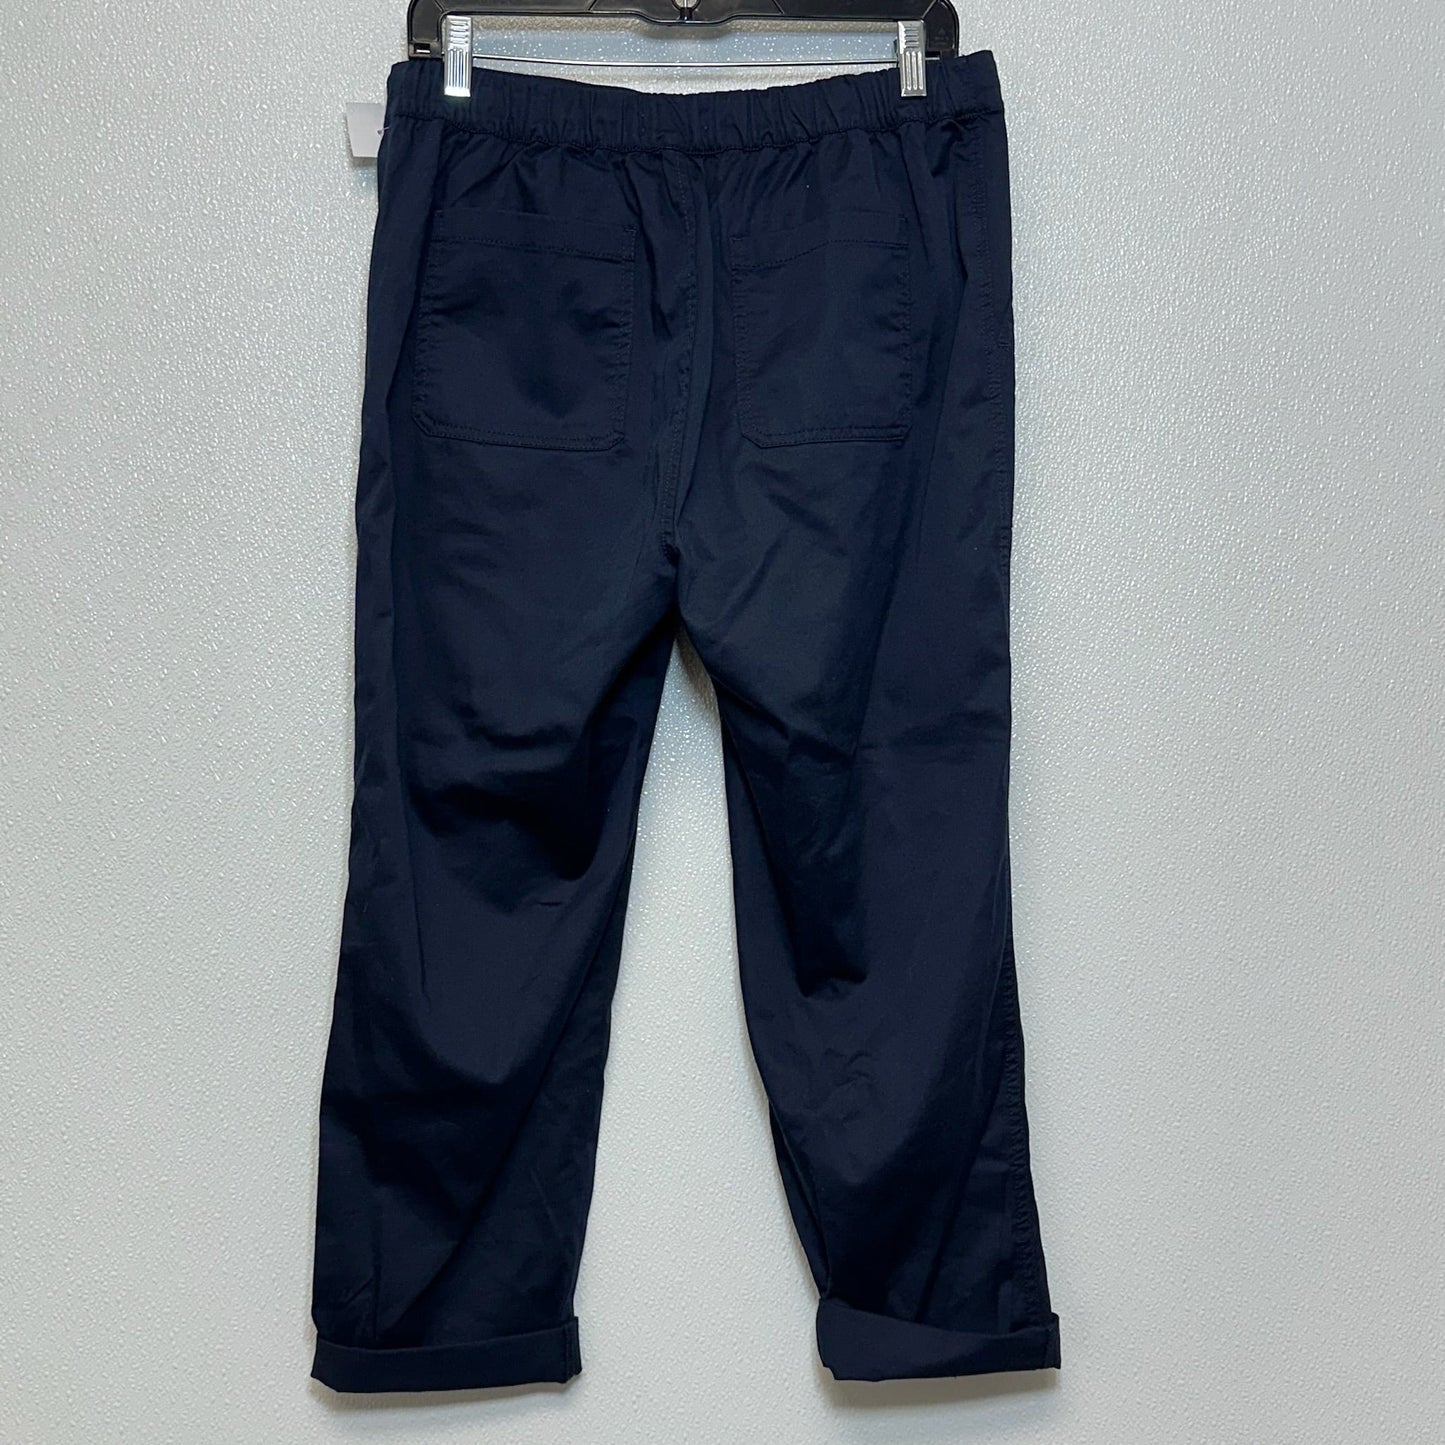 Navy Pants Ankle Lou And Grey, Size M